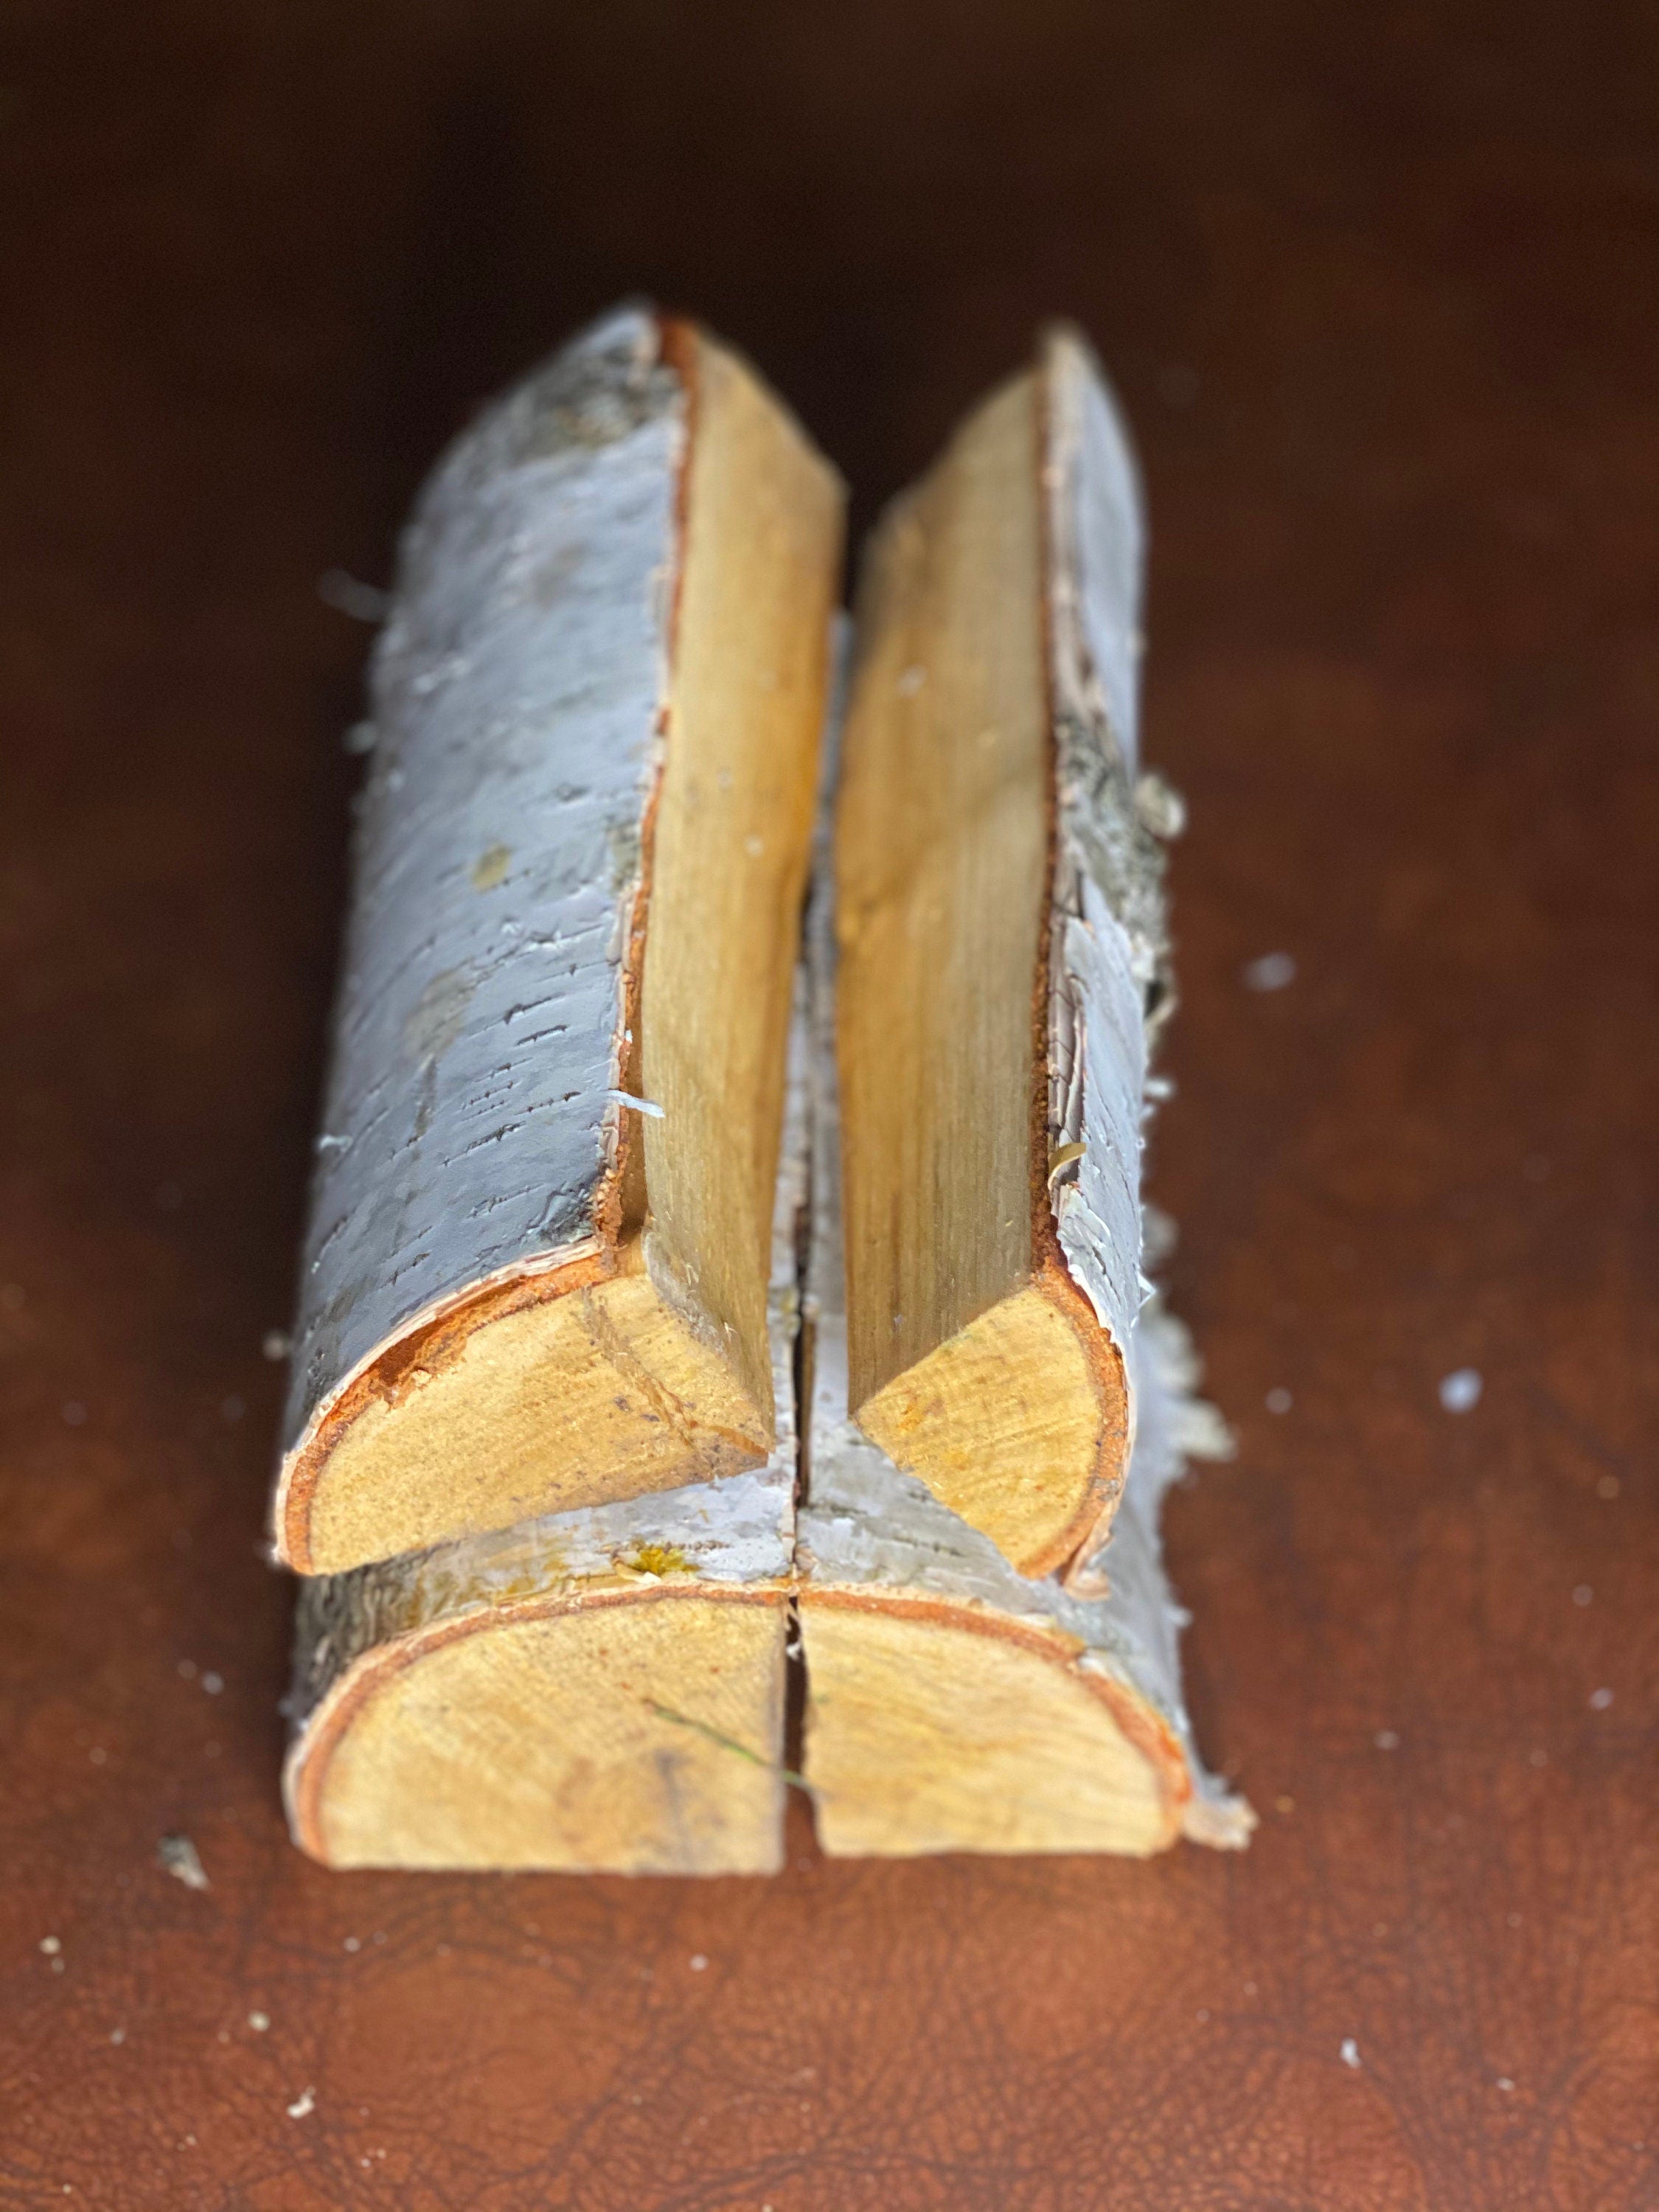 Split White Birch Logs, 4 Count, 8 Inches in Length, About 3 Inches in Diameter